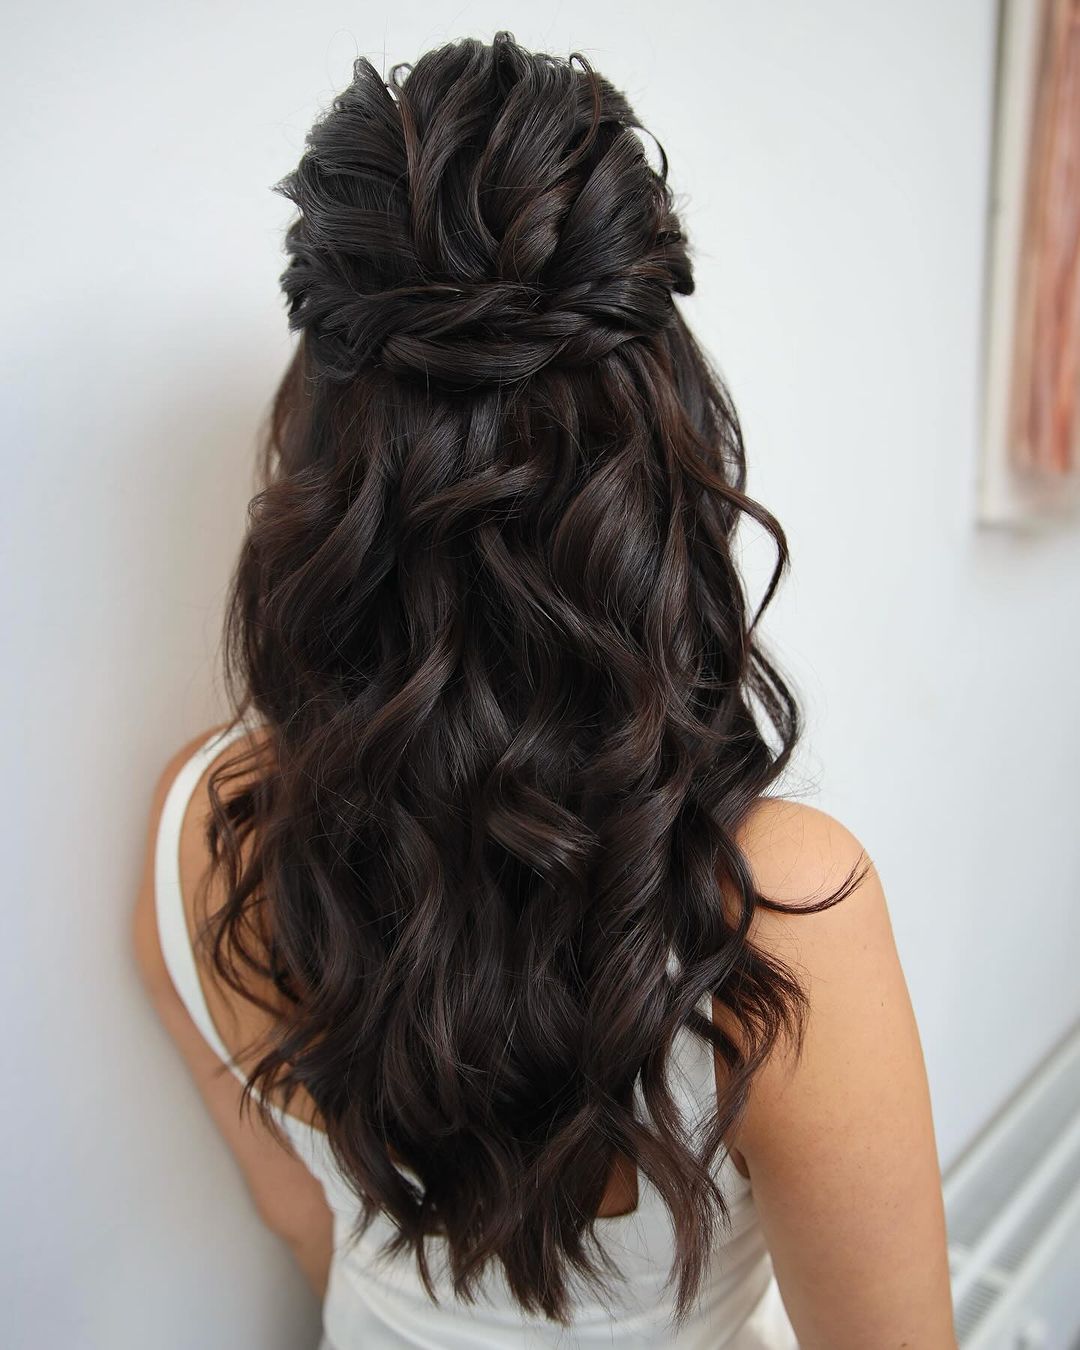 Fishtail braids from